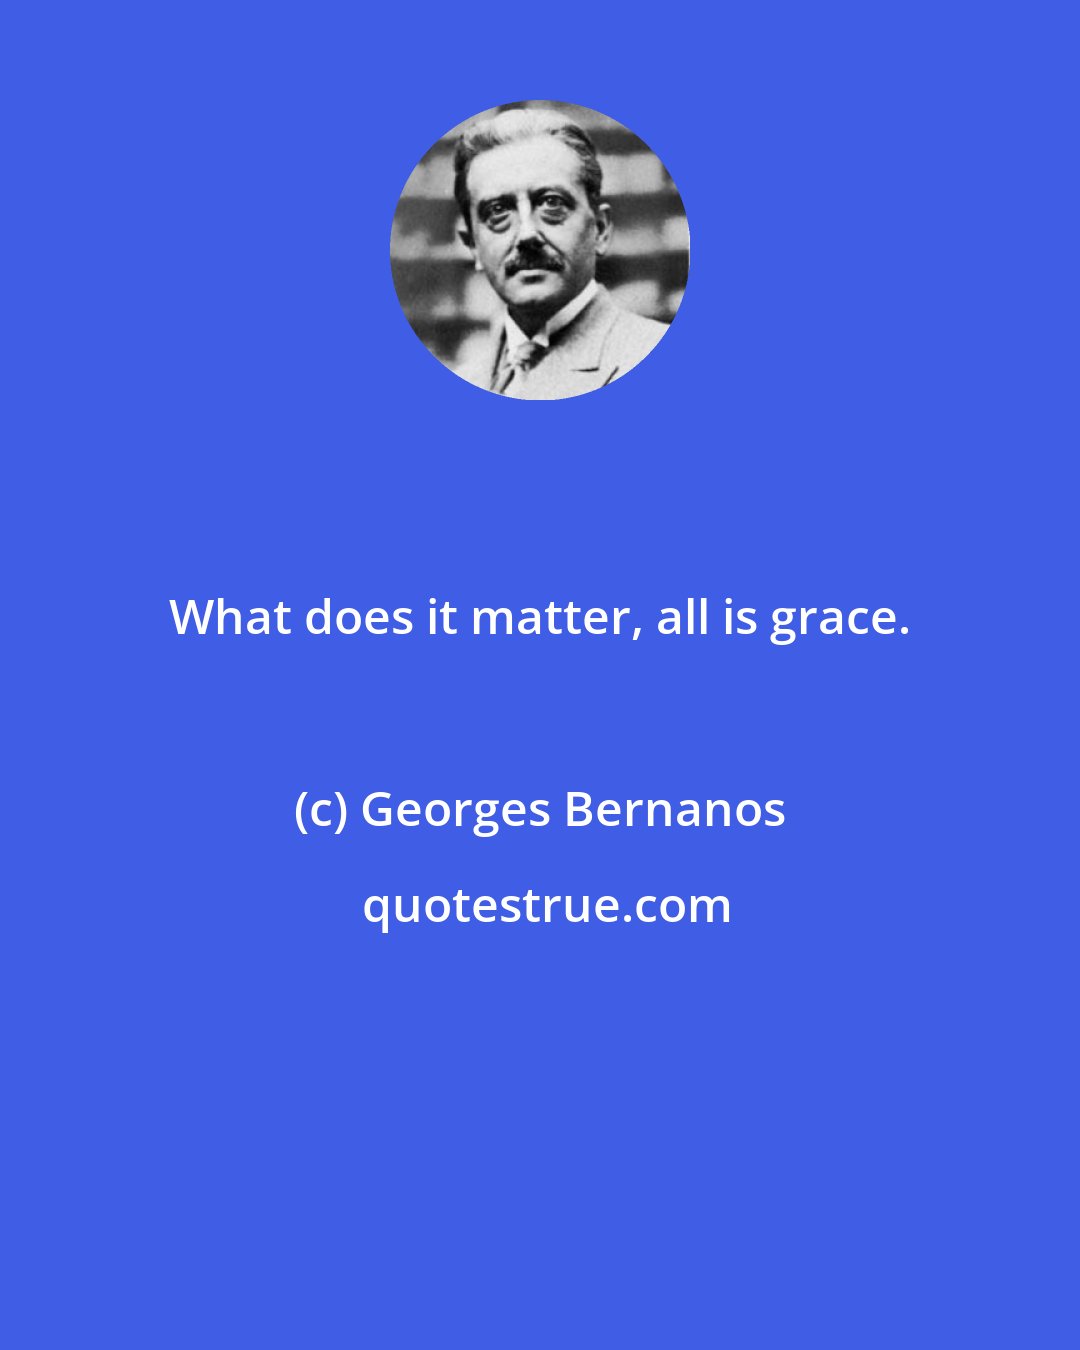 Georges Bernanos: What does it matter, all is grace.